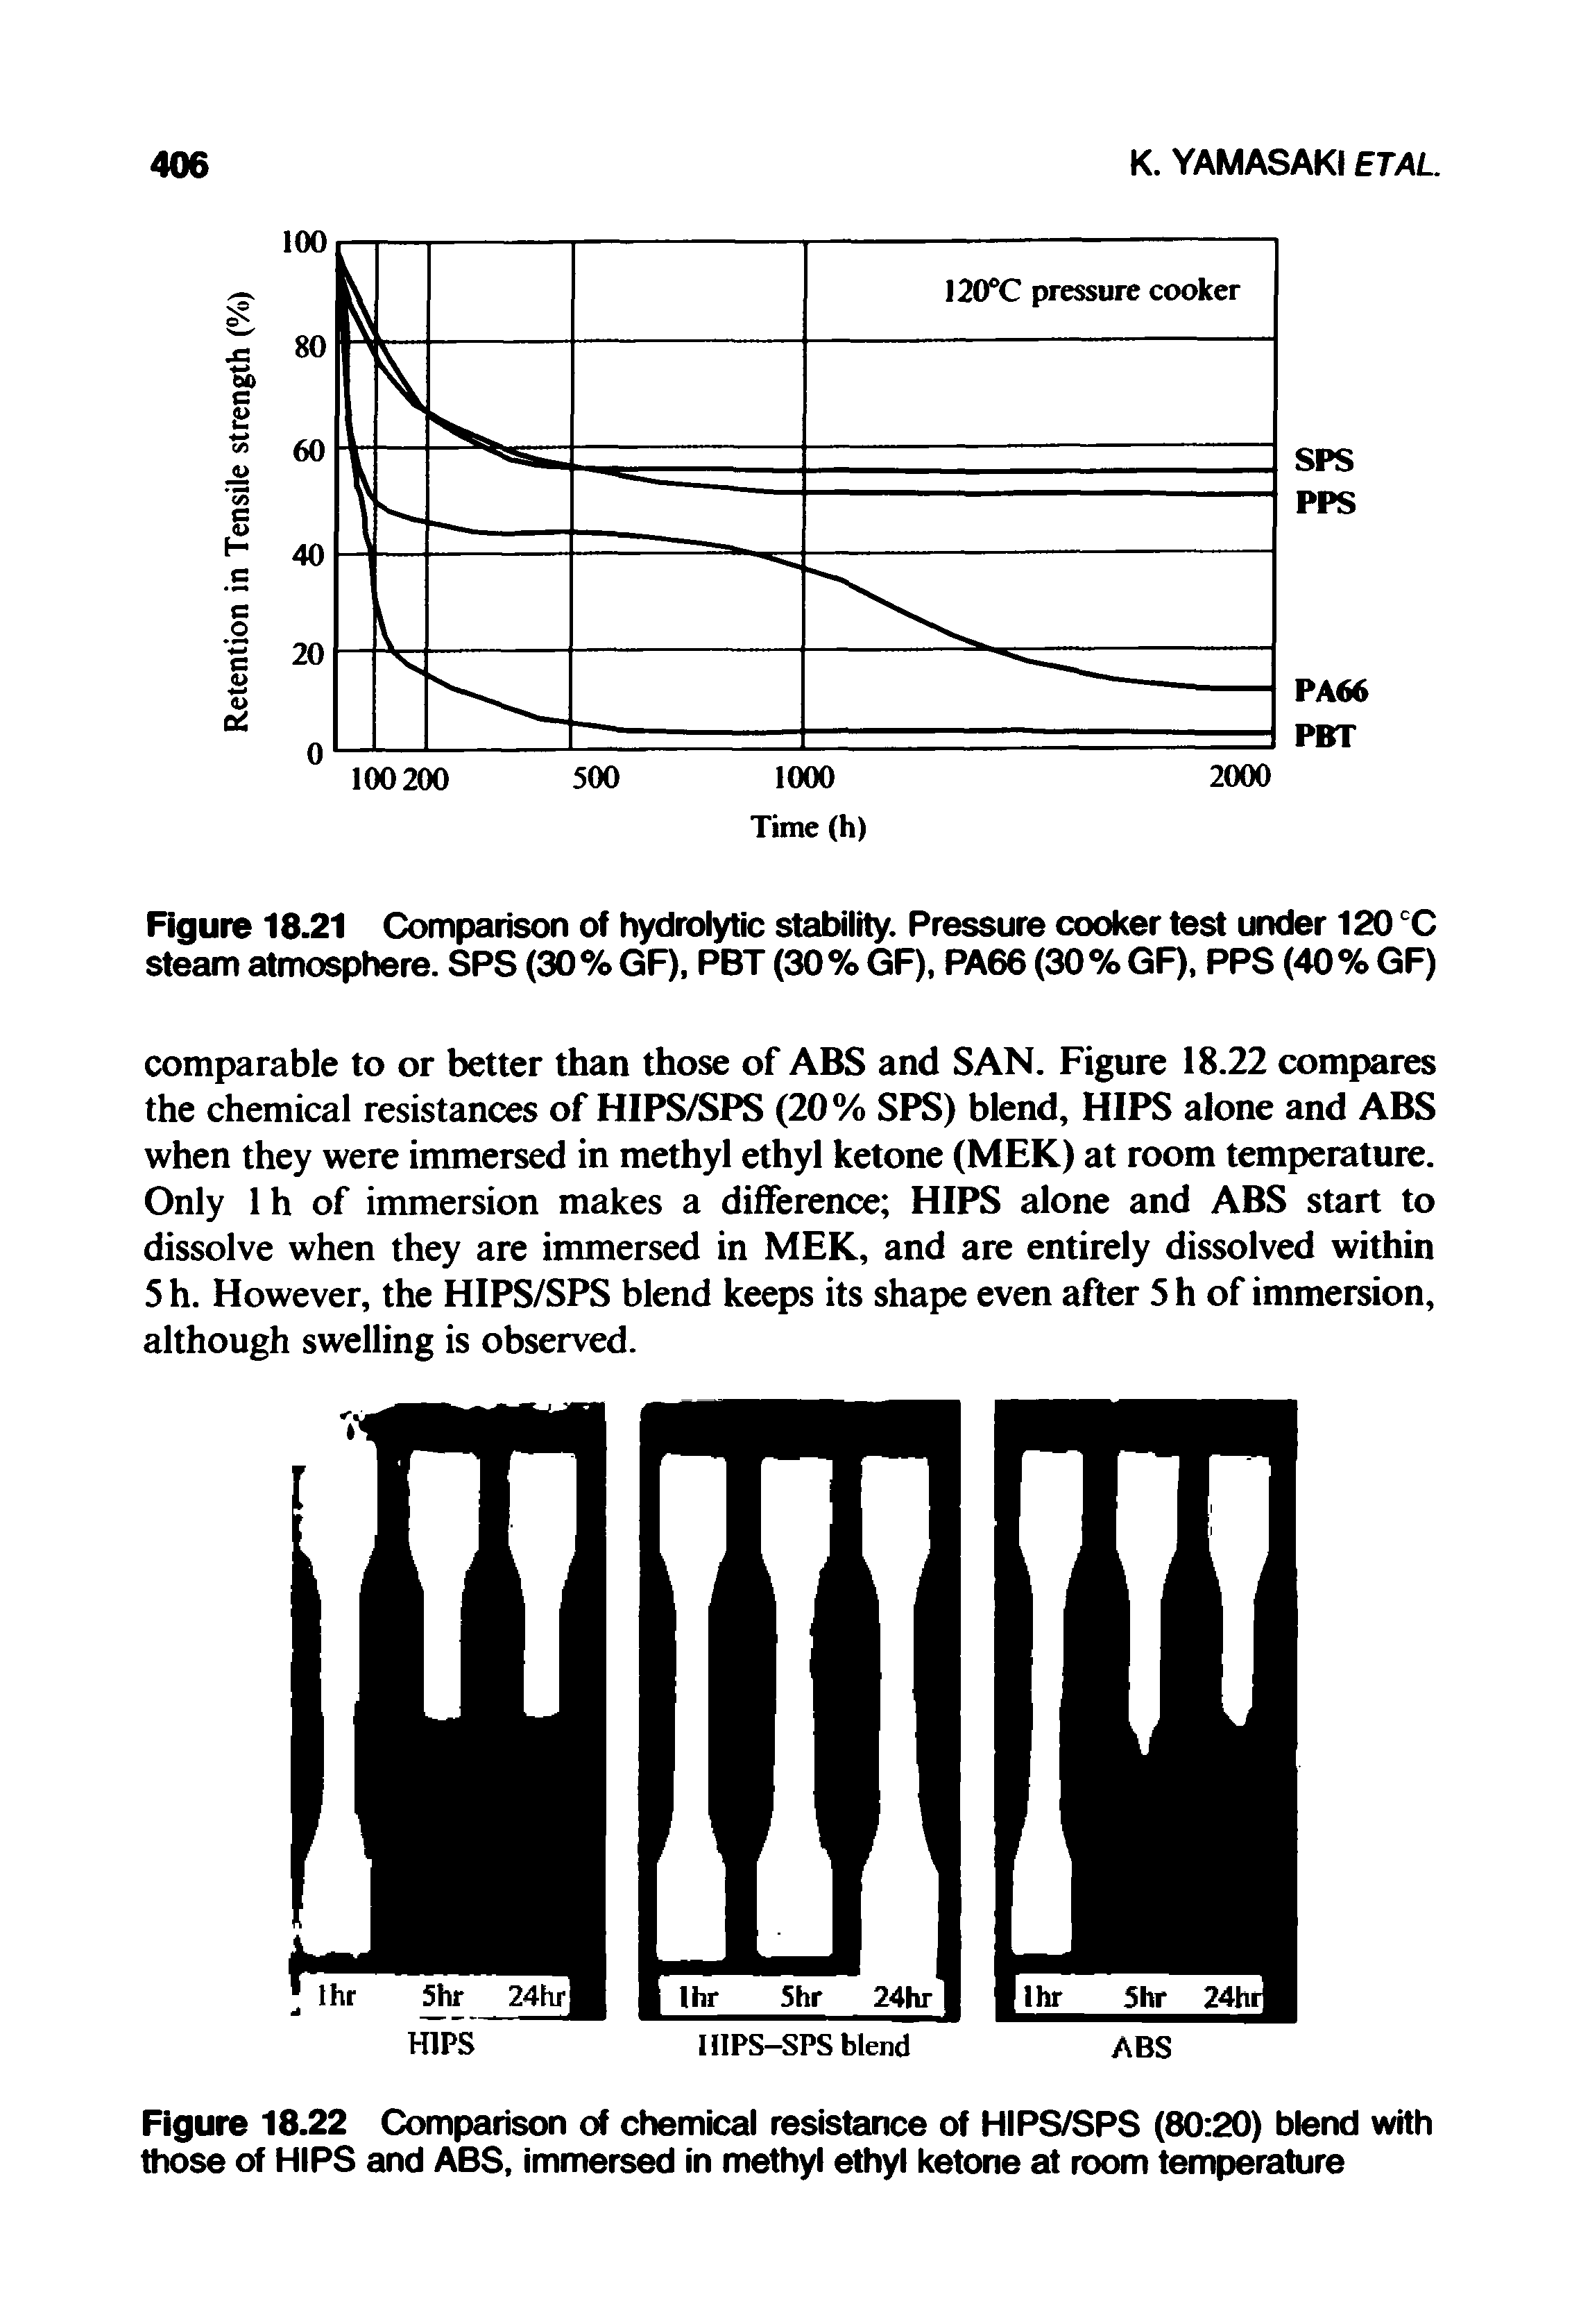 Figure 18.21 Comparison of hydrolytic stability. Pressure cooker test under 120 CC steam atmosphere. SPS (30% GF), PBT (30% GF), PA66 (30% GF), PPS (40% GF)...